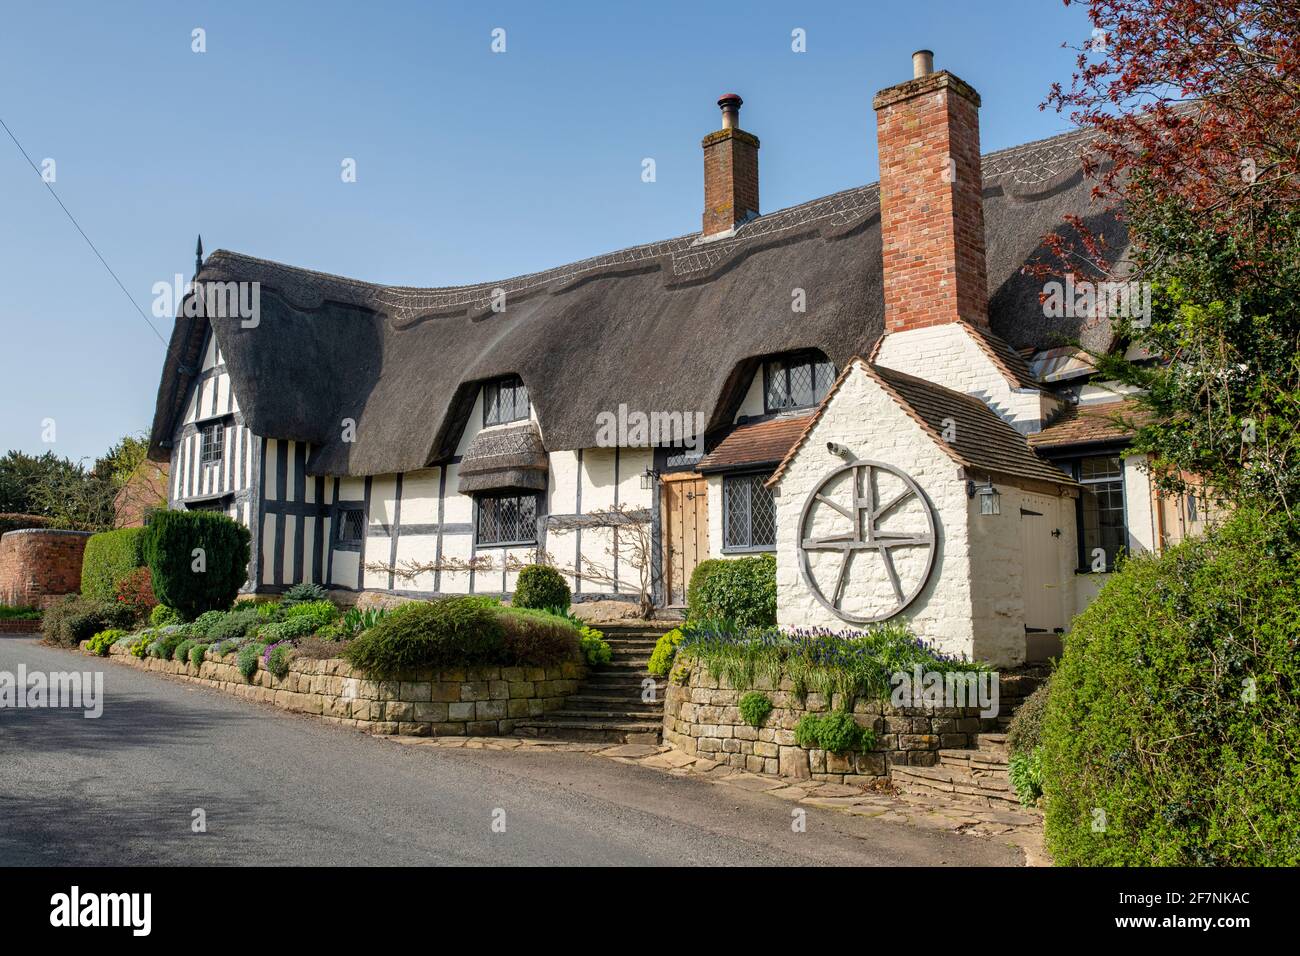 Thatched black and white timber framed cottage in Great Comberton, Cotswolds, Wychavon district, Worcestershire, UK Stock Photo